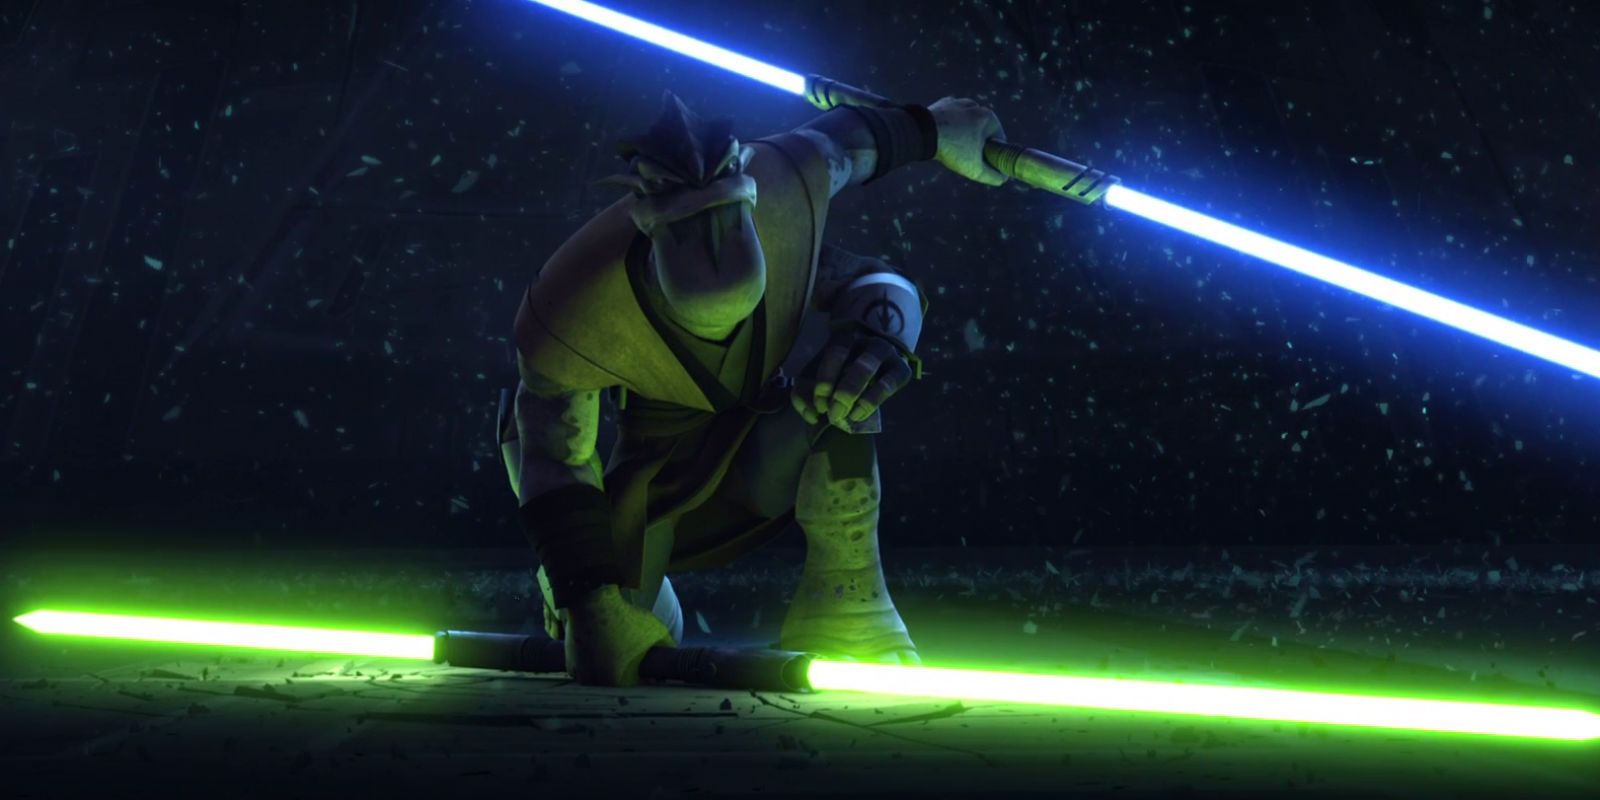 Pong Krell in Star Wars The Clone Wars.